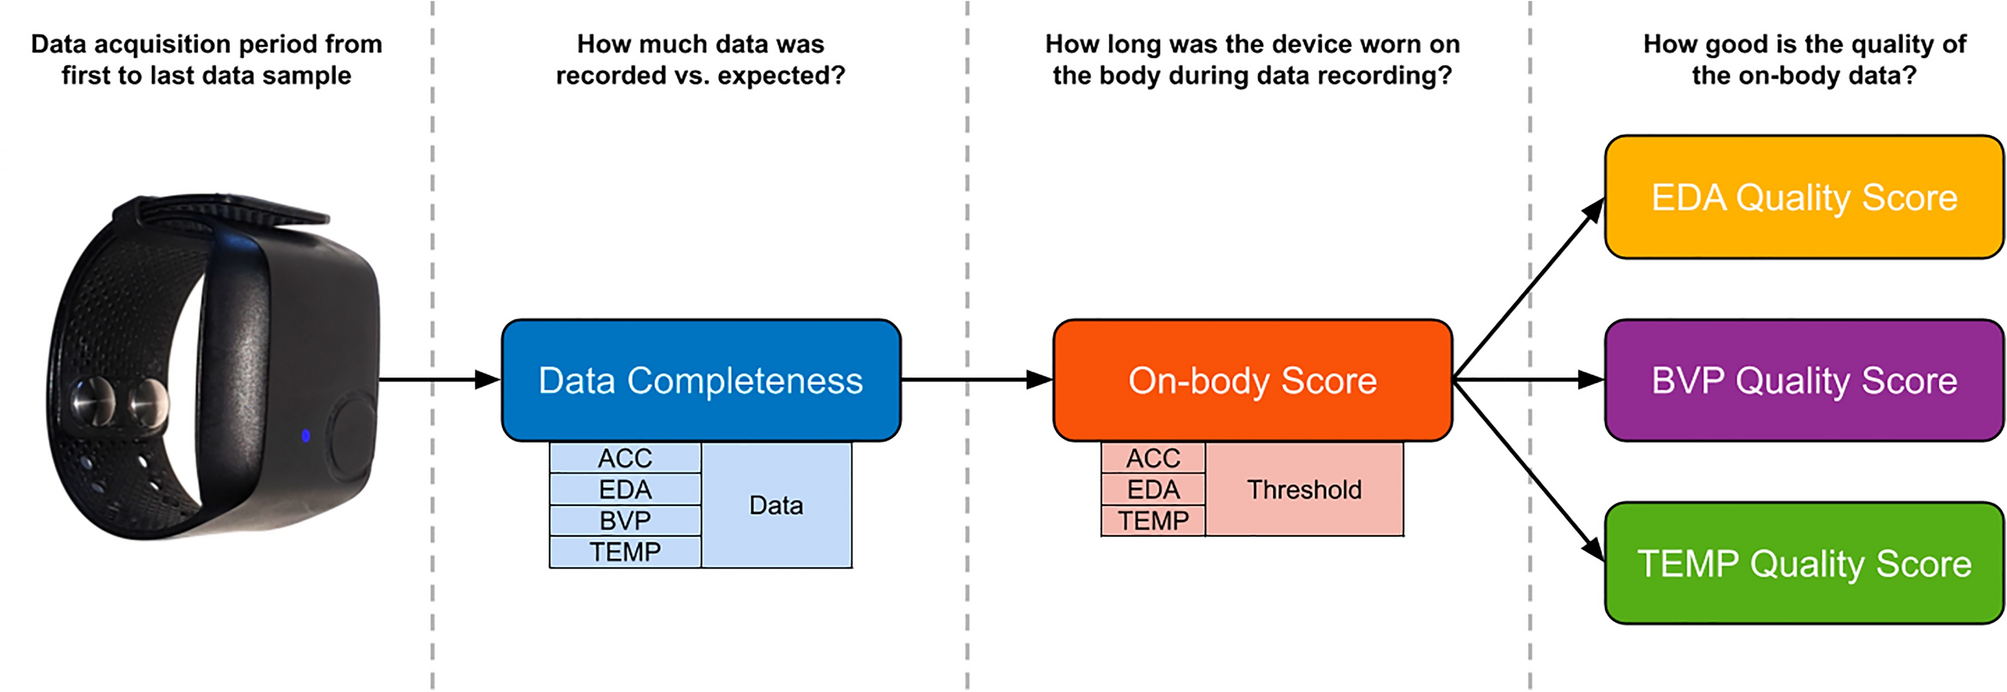 Data quality evaluation in wearable monitoring | Scientific Reports